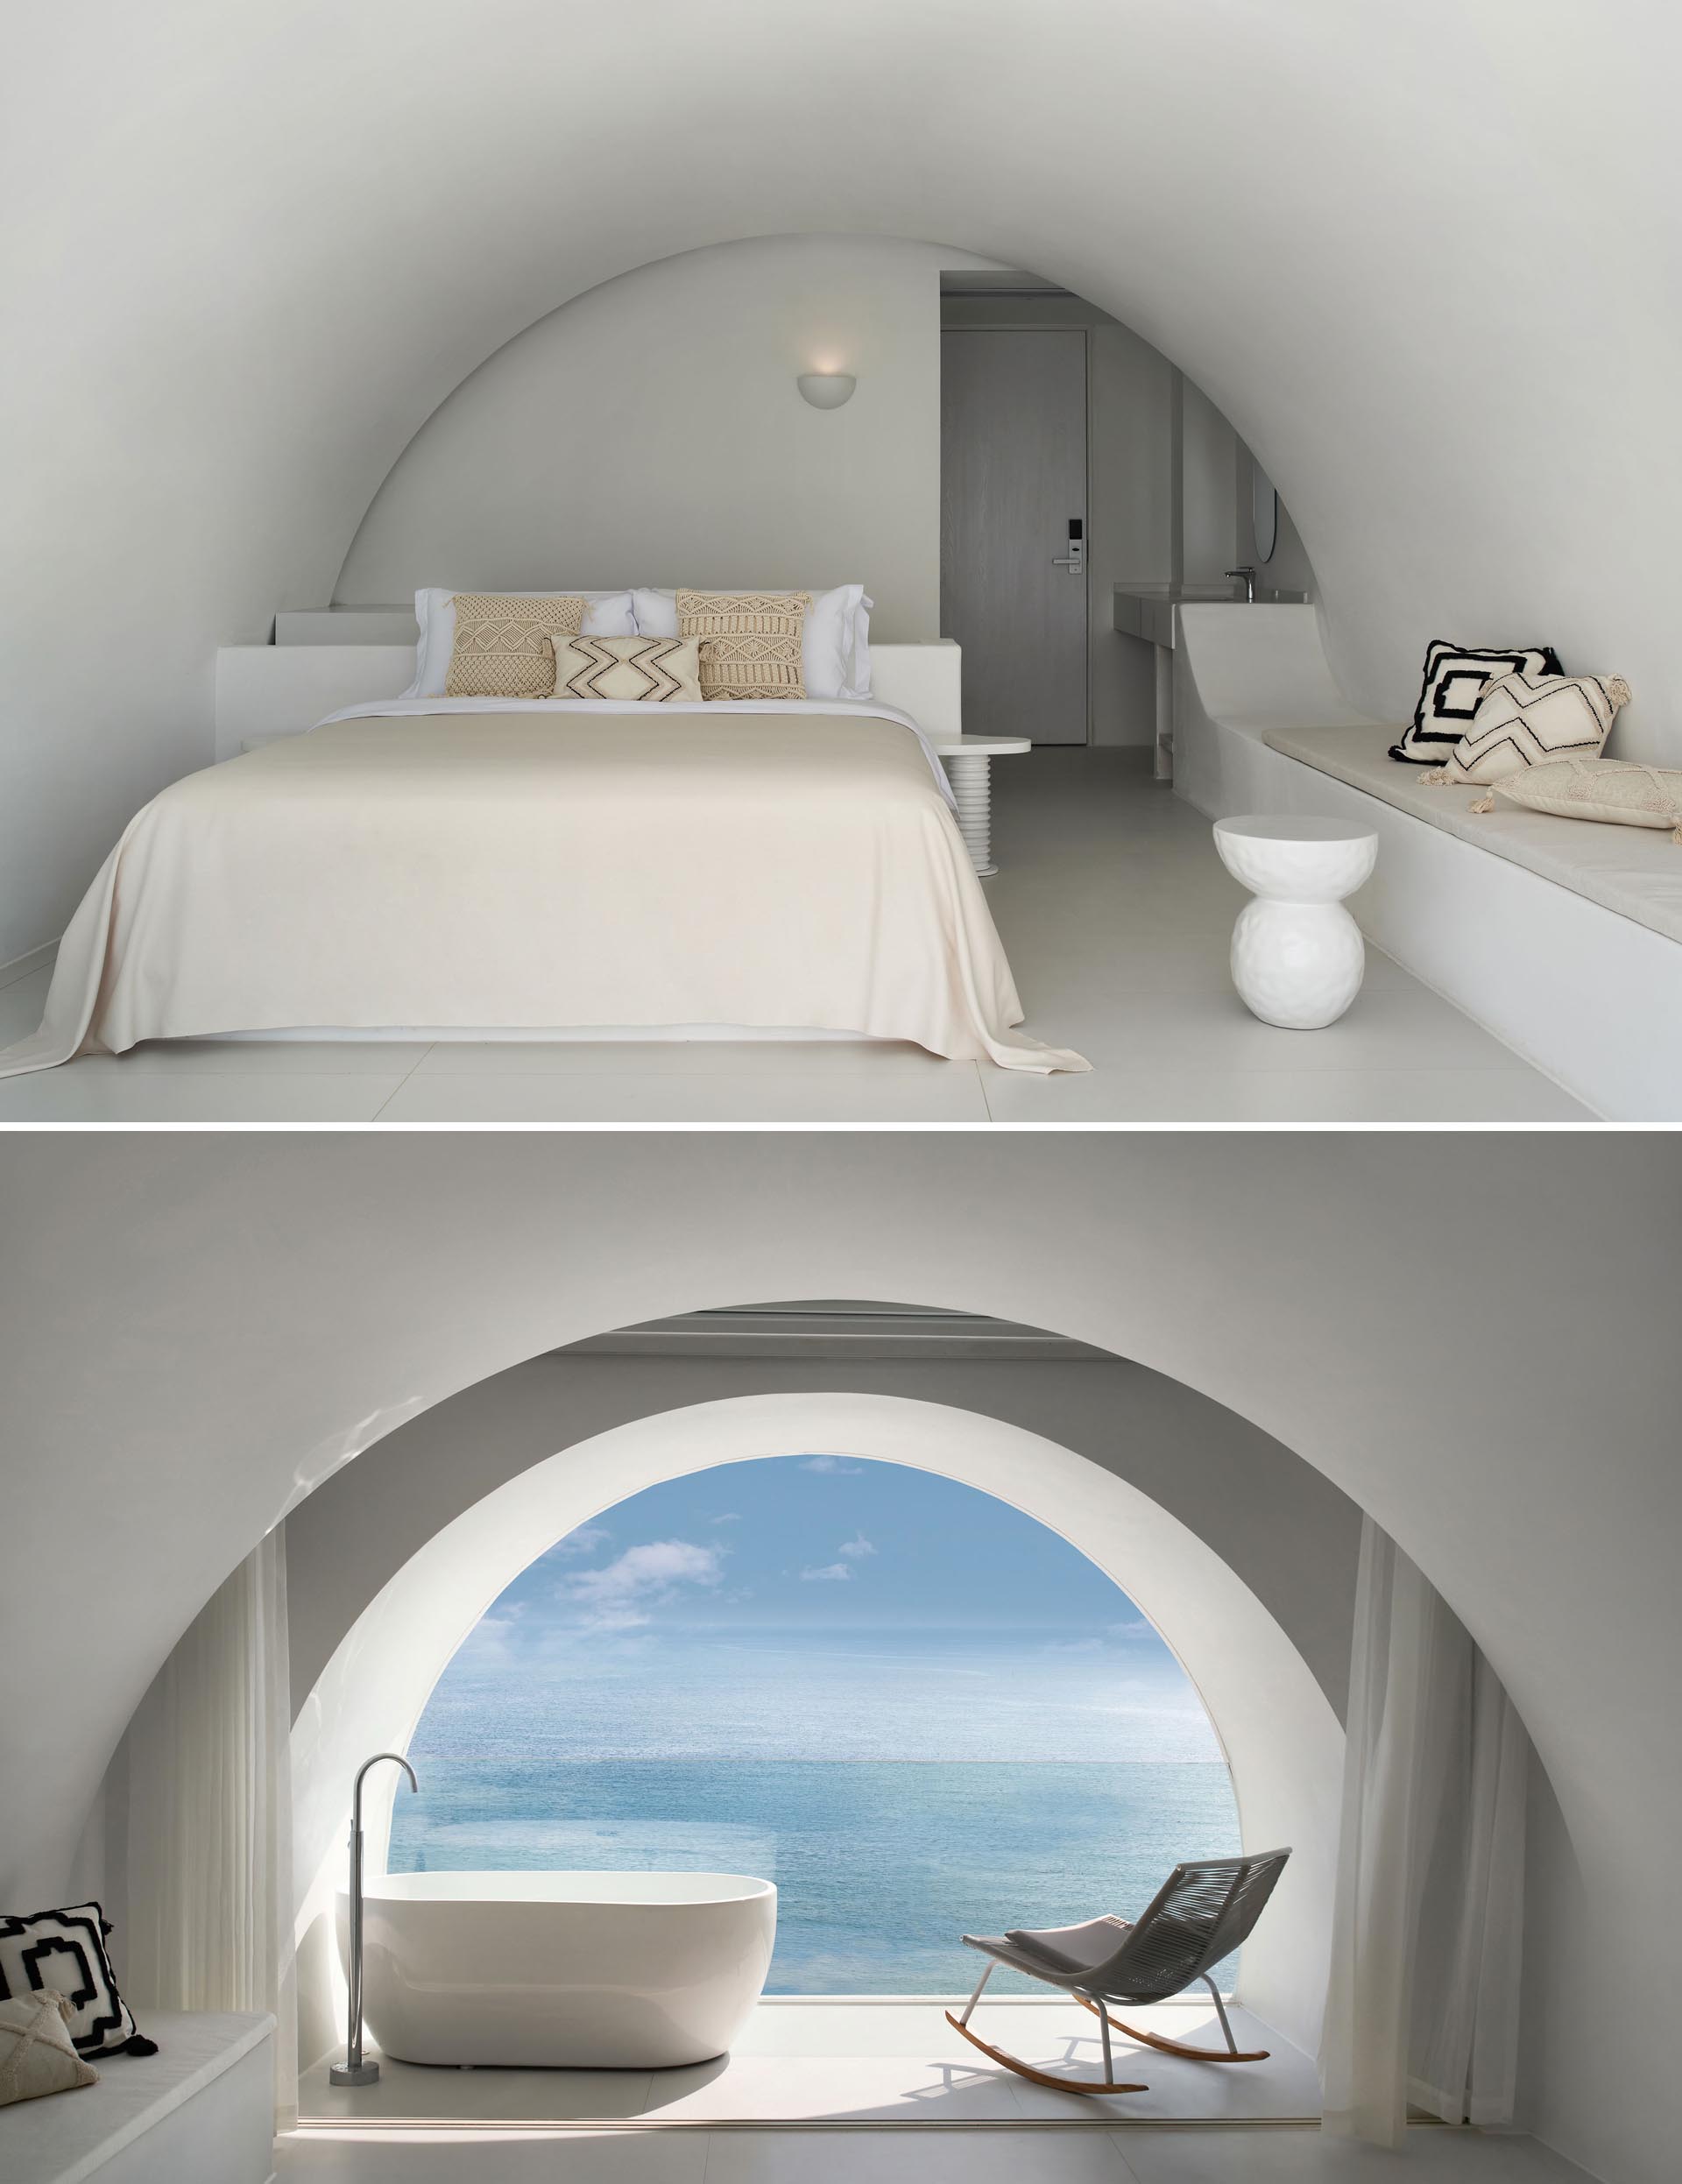 A modern while hotel room with an arched ceiling and bathtub by the window.